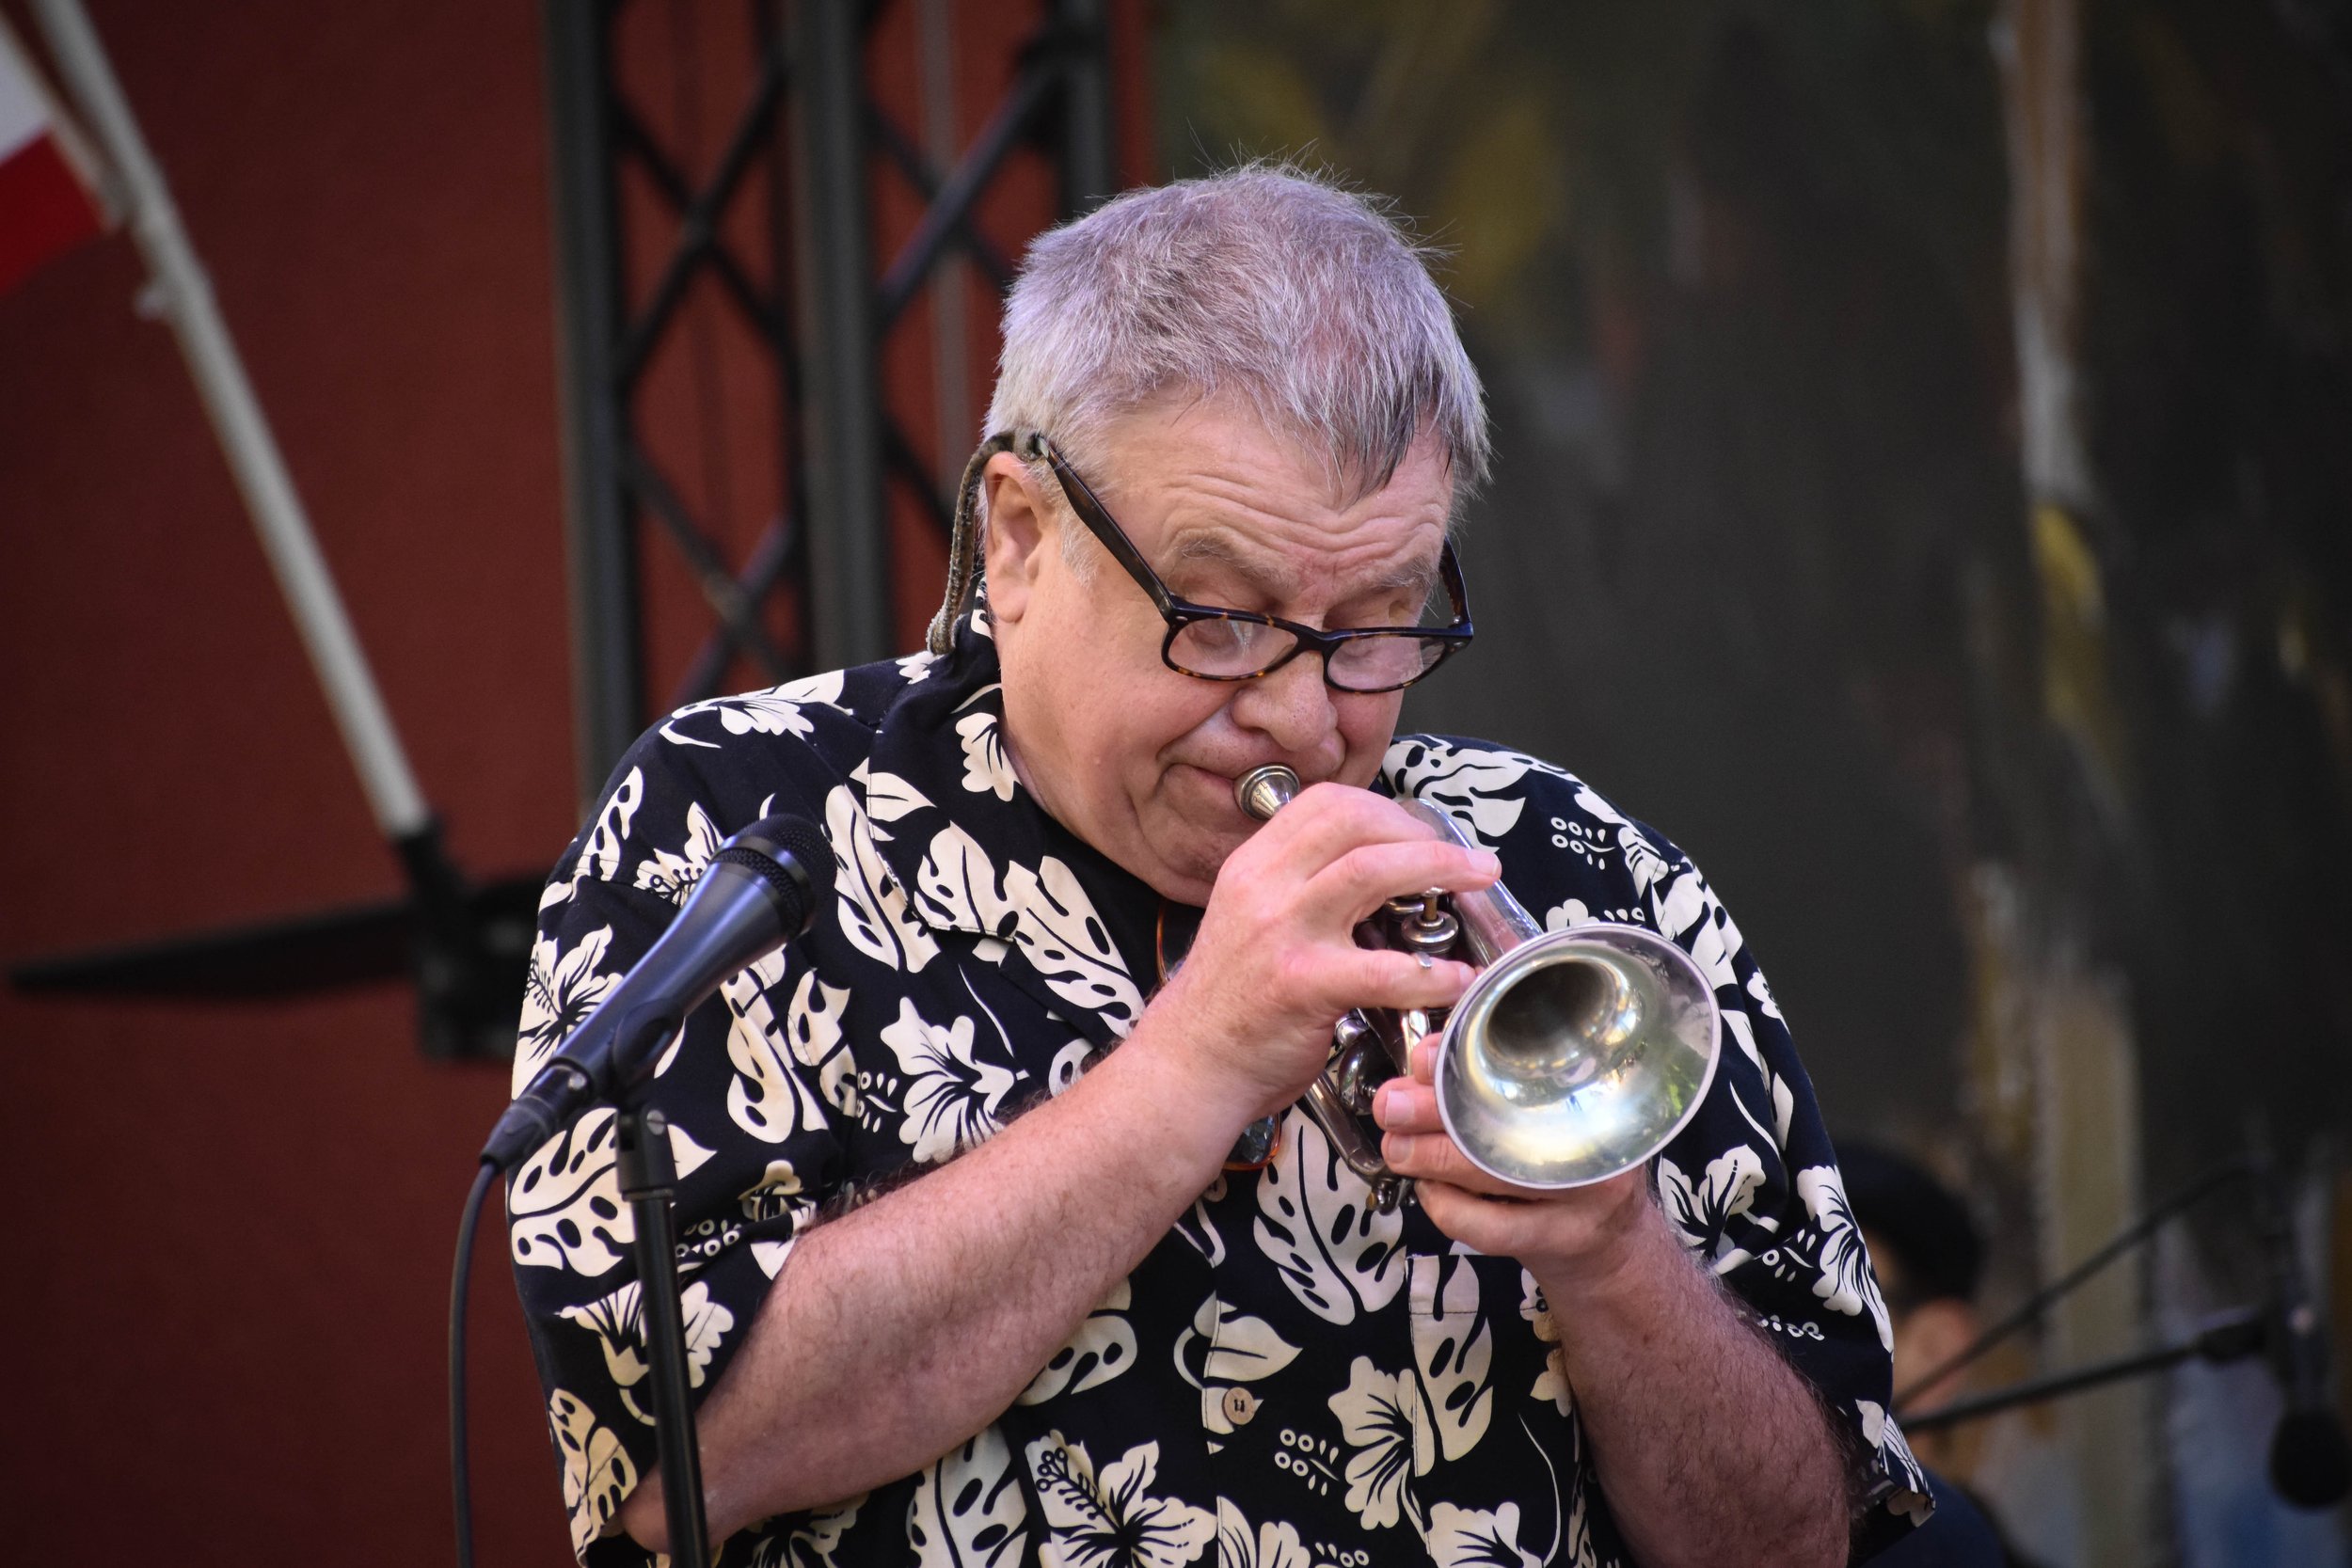 07-10-2023 Laguna Jazz Band concert at Pageant of the Masters by Peyton Webster18-22.jpg